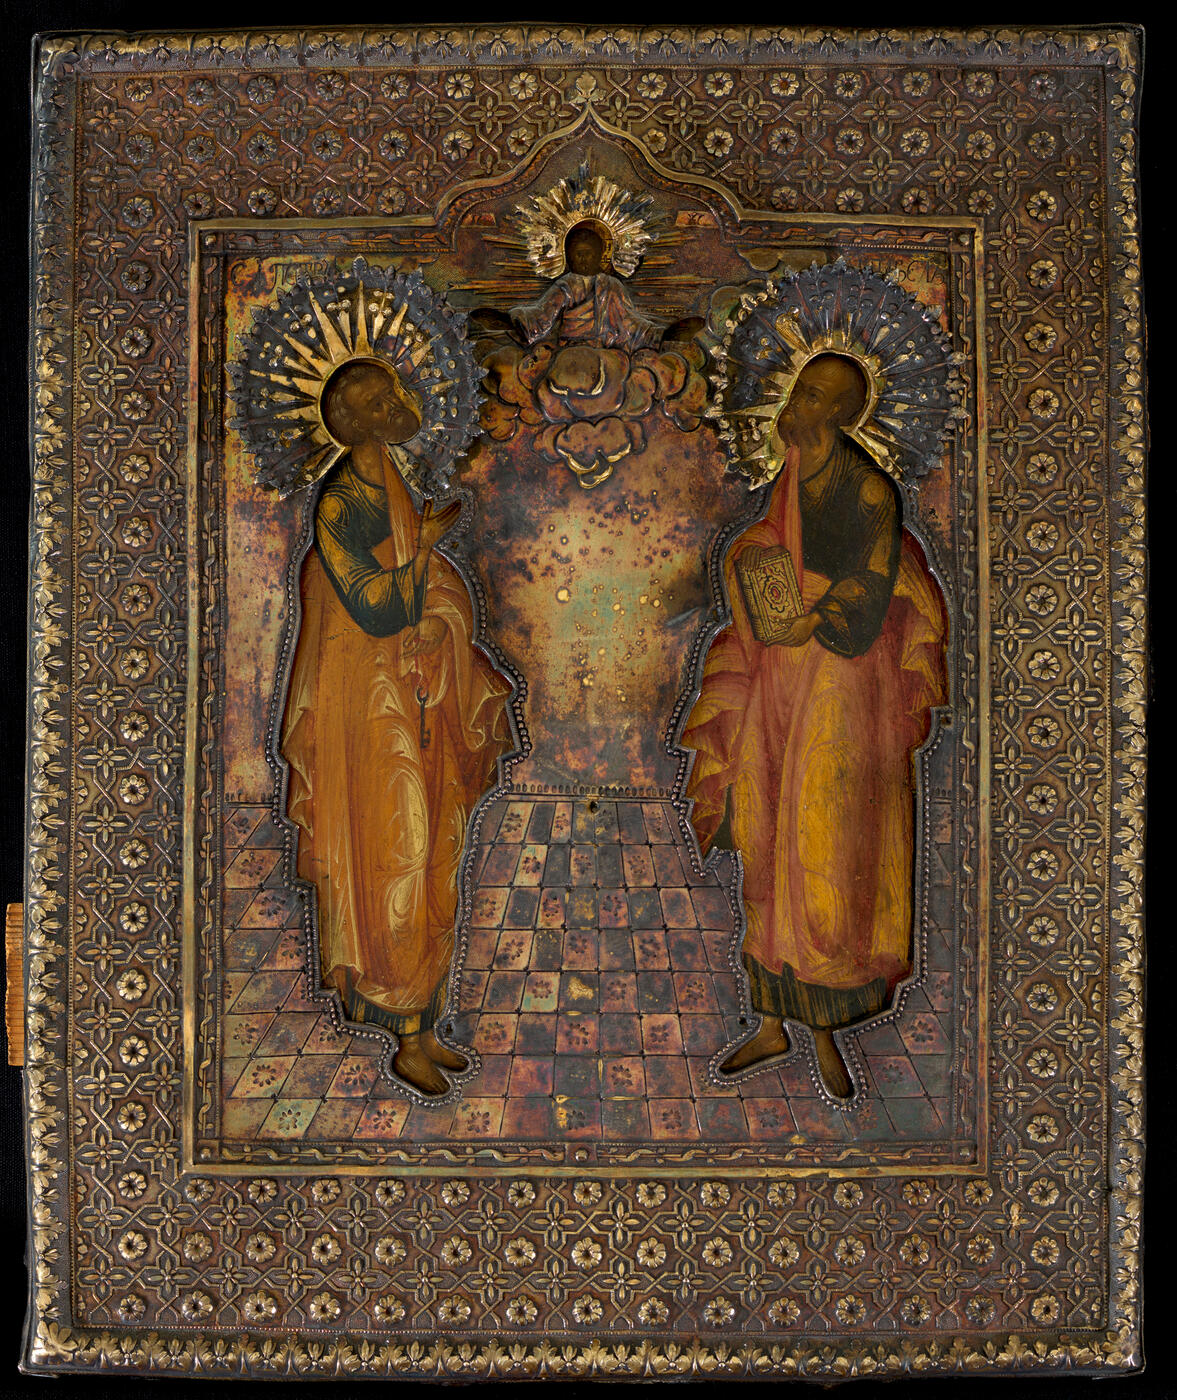 The Holy Apostles Peter and Paul in Silver-Gilt Oklad